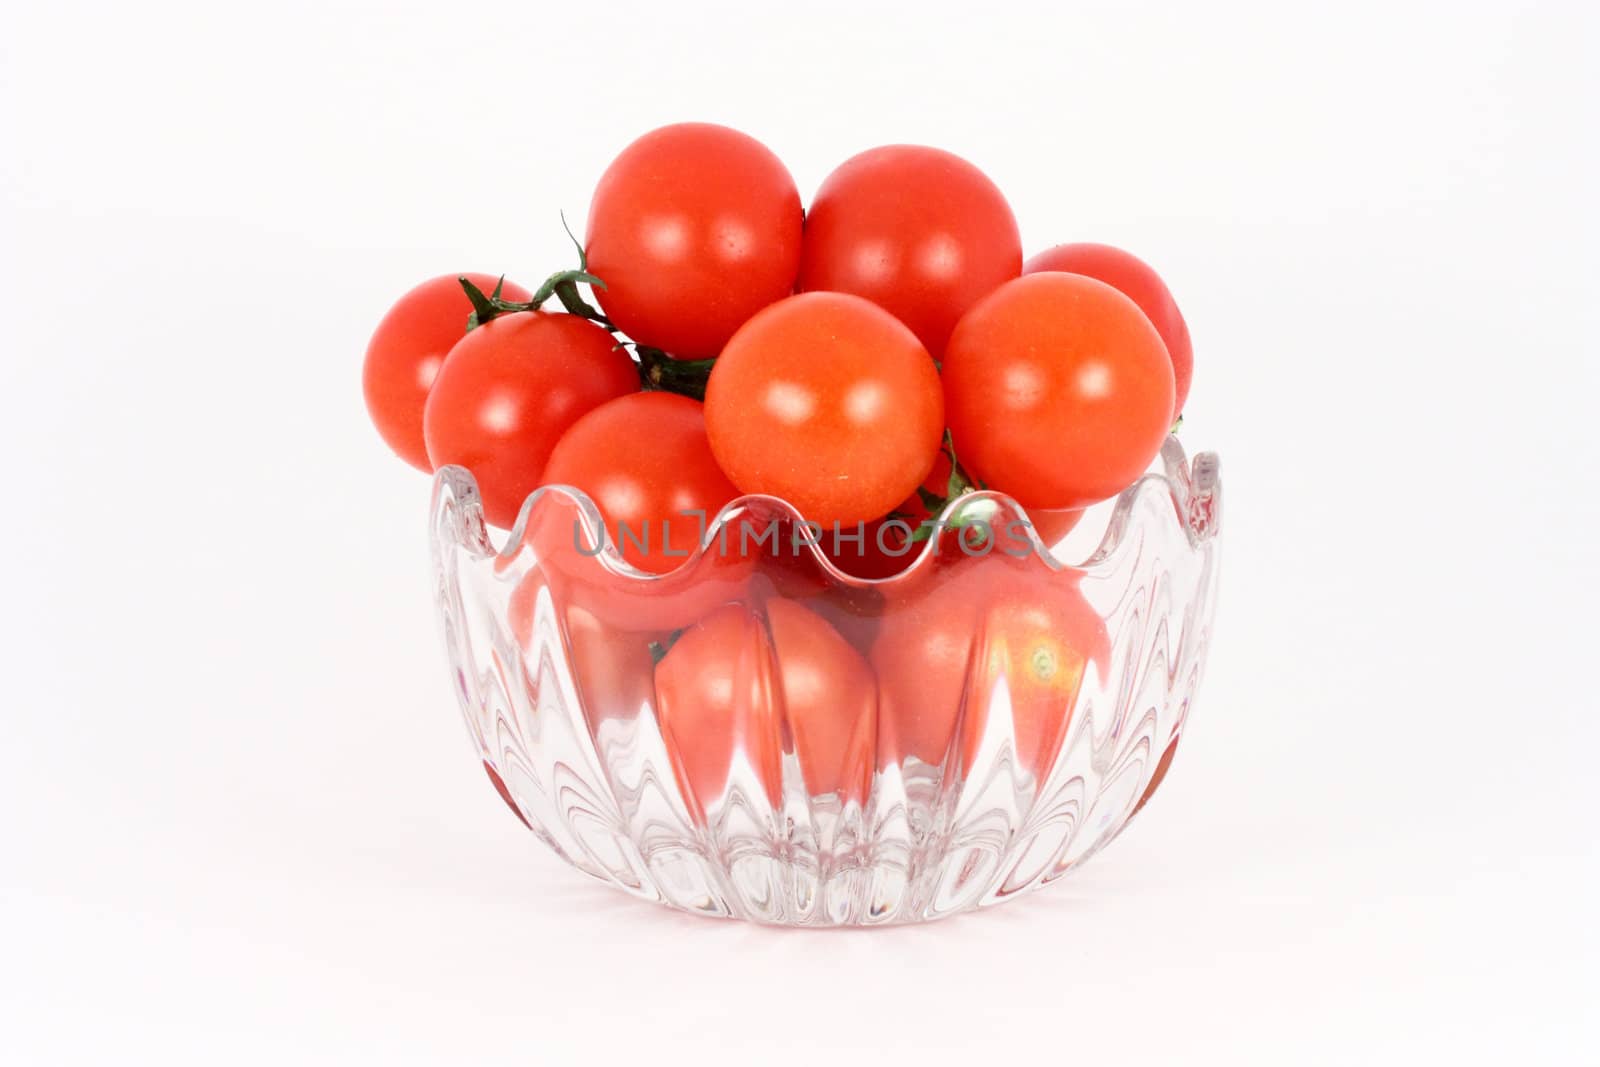 Cherry tomato in glass bowl isolated on white